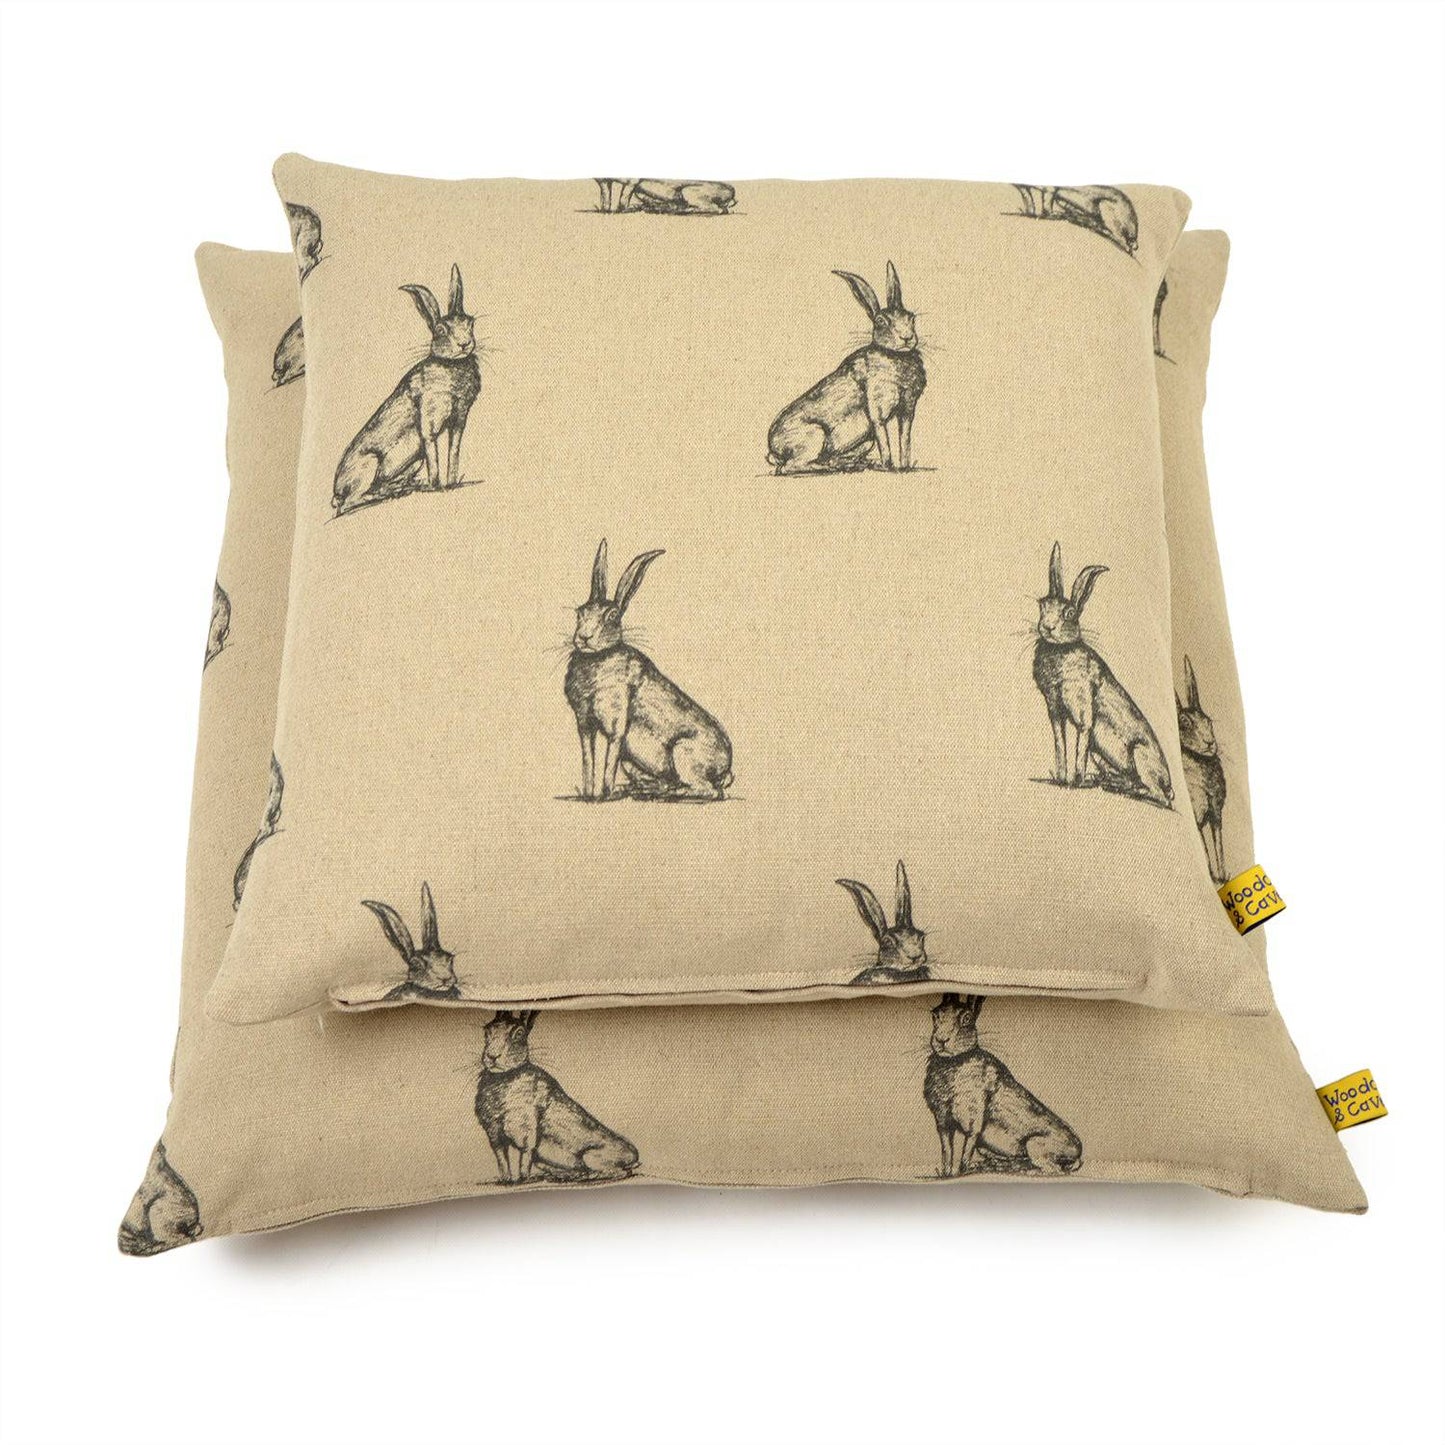 Hares Linen Cushion by Woodcock & Cavendish for sale - Woodcock and Cavendish